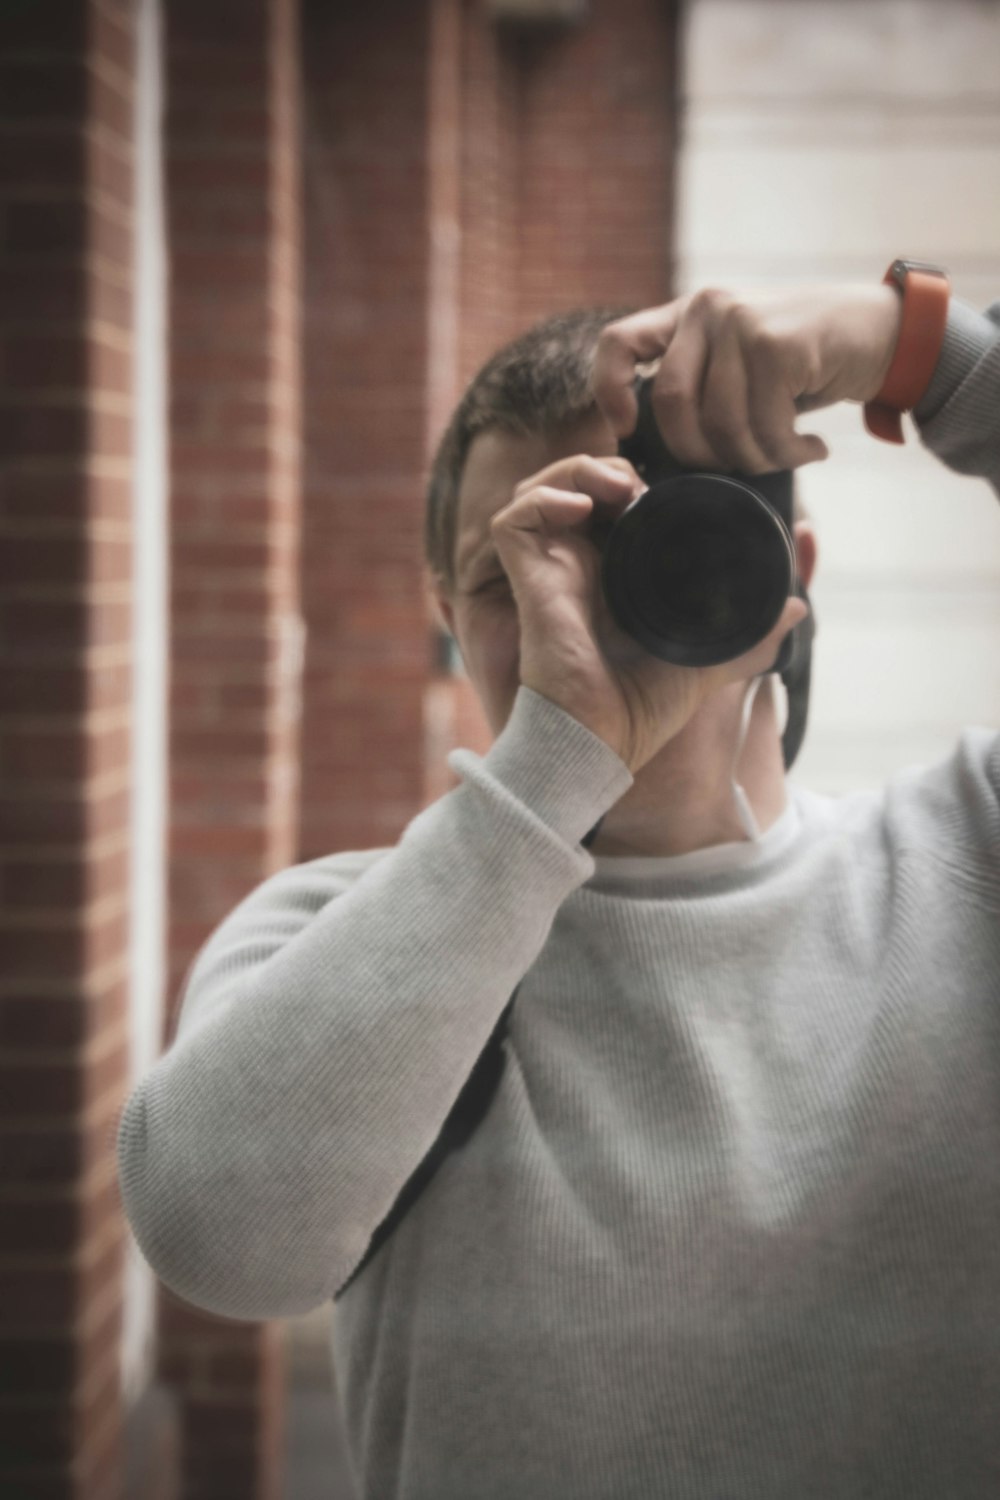 woman in gray sweater holding black camera lens